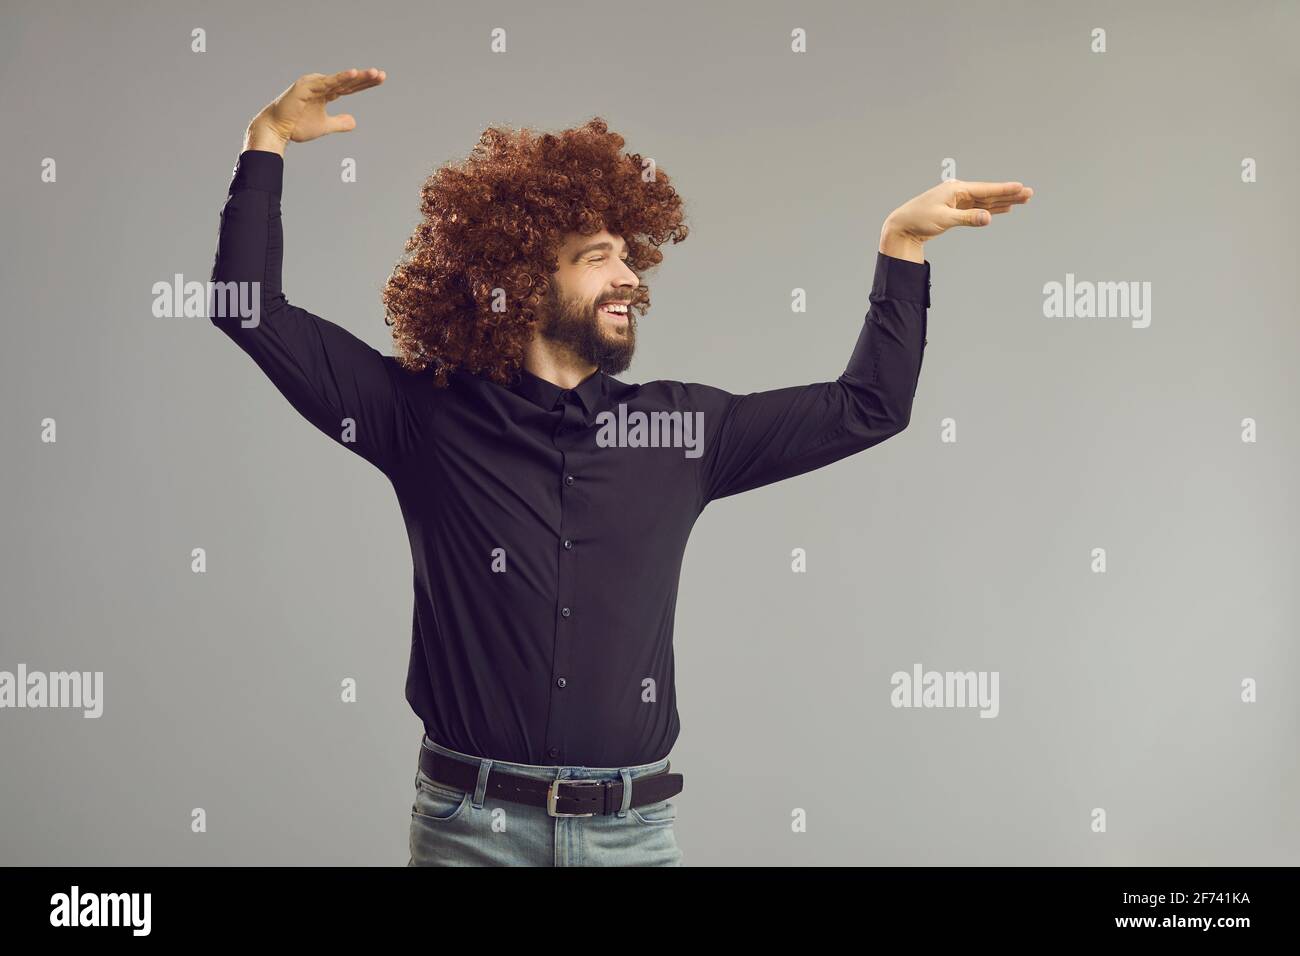 Happy young man with crazy funny curly hairstyle dancing on gray studio background Stock Photo